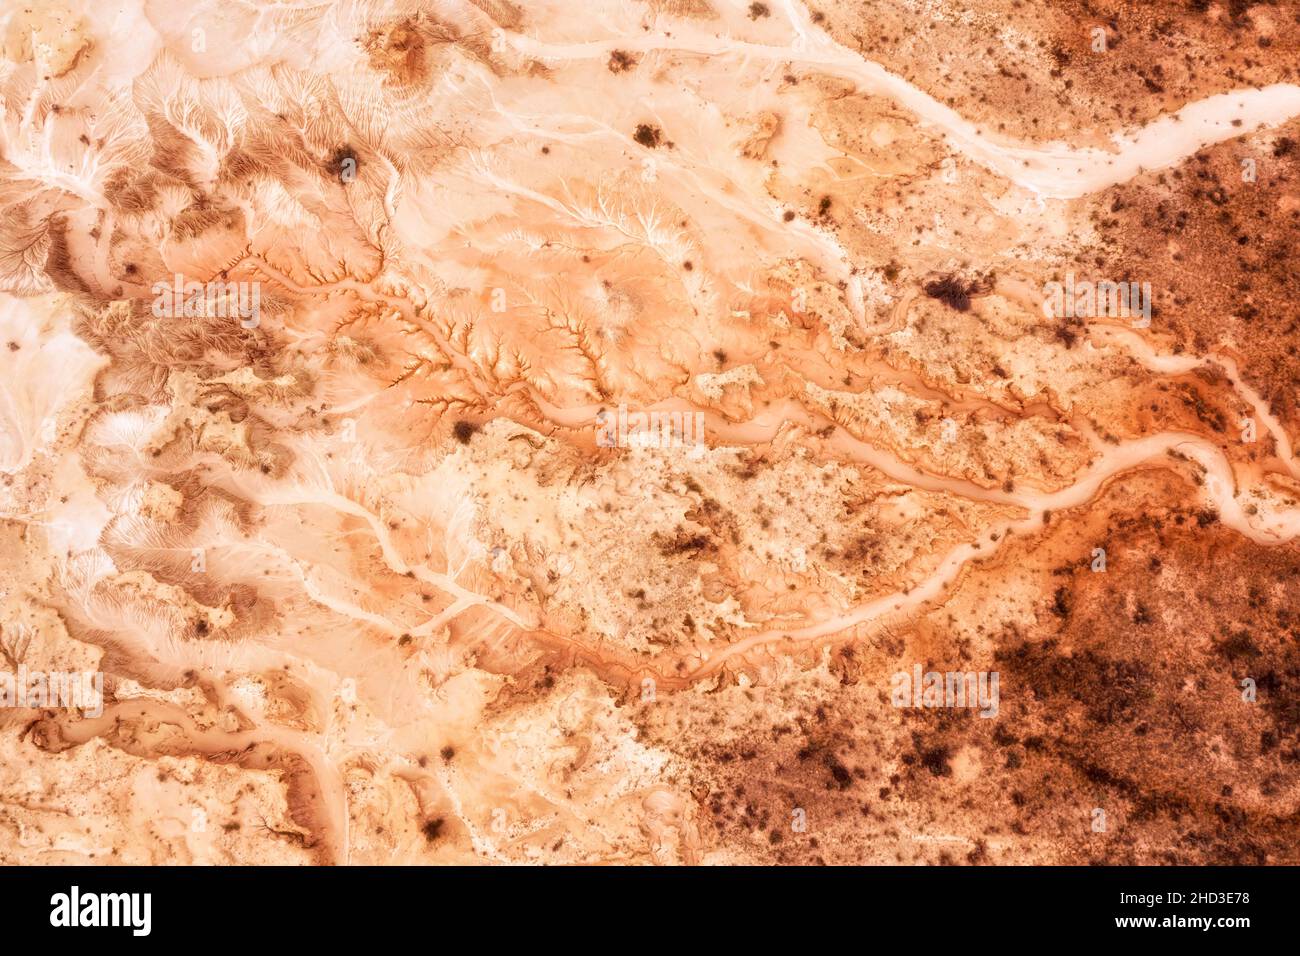 Mungo lake in Australian outback with red soil - dry lake bed with eroded creek streams dried in semi-desert climate - aerial top down view. Stock Photo